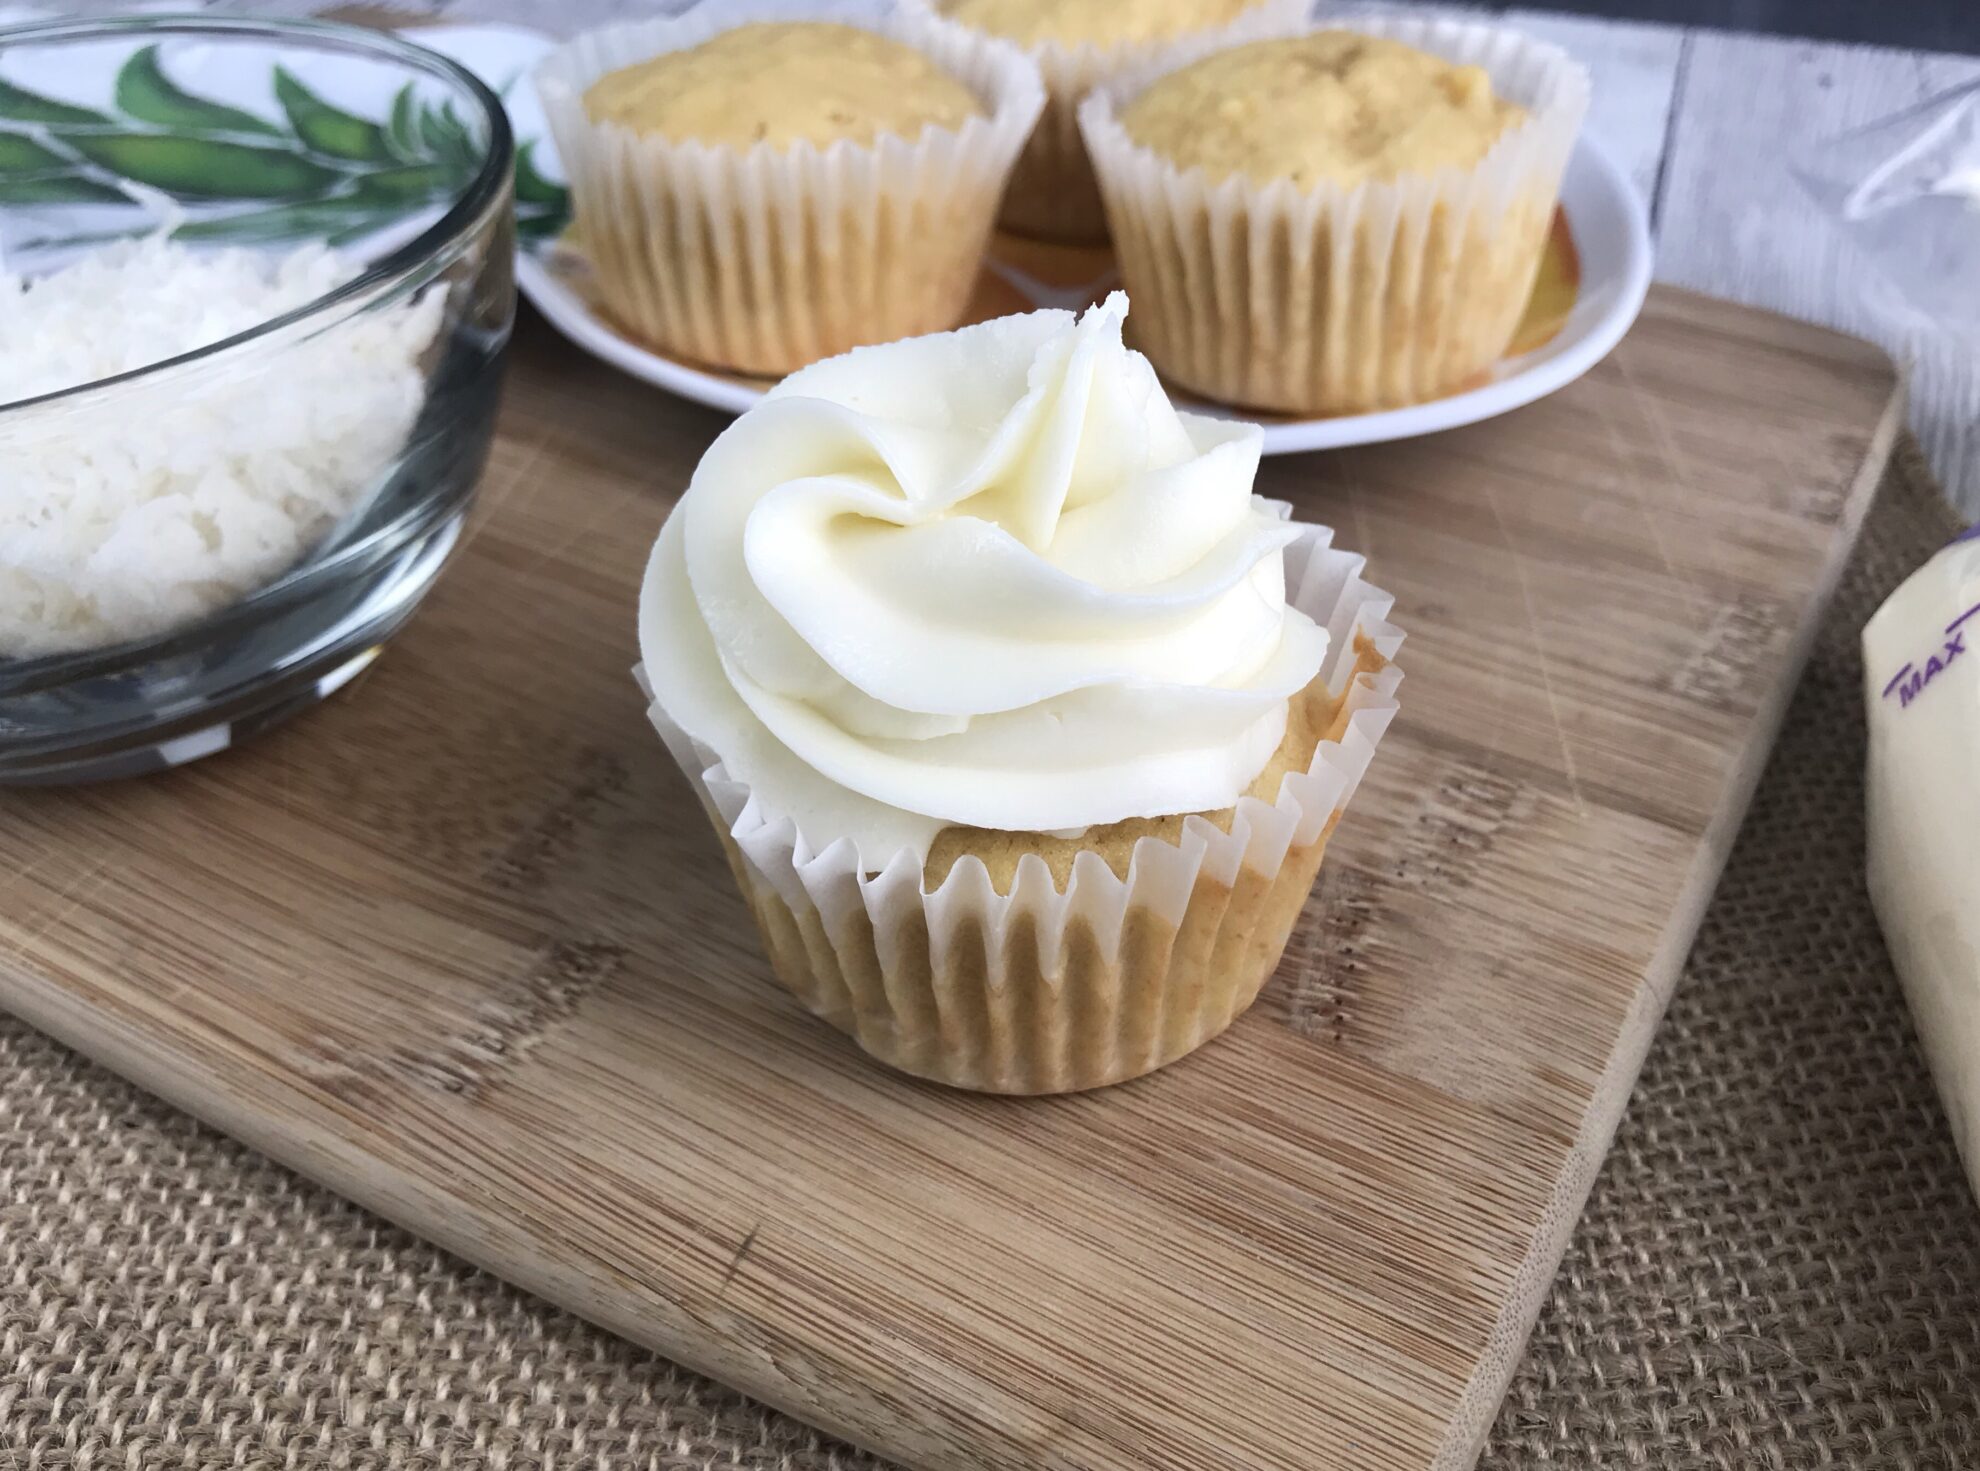 These Pineapple Cupcakes will whisk you away to the Tropics! The perfect refreshing dessert as a snack or for a birthday on 5DollarDinners!